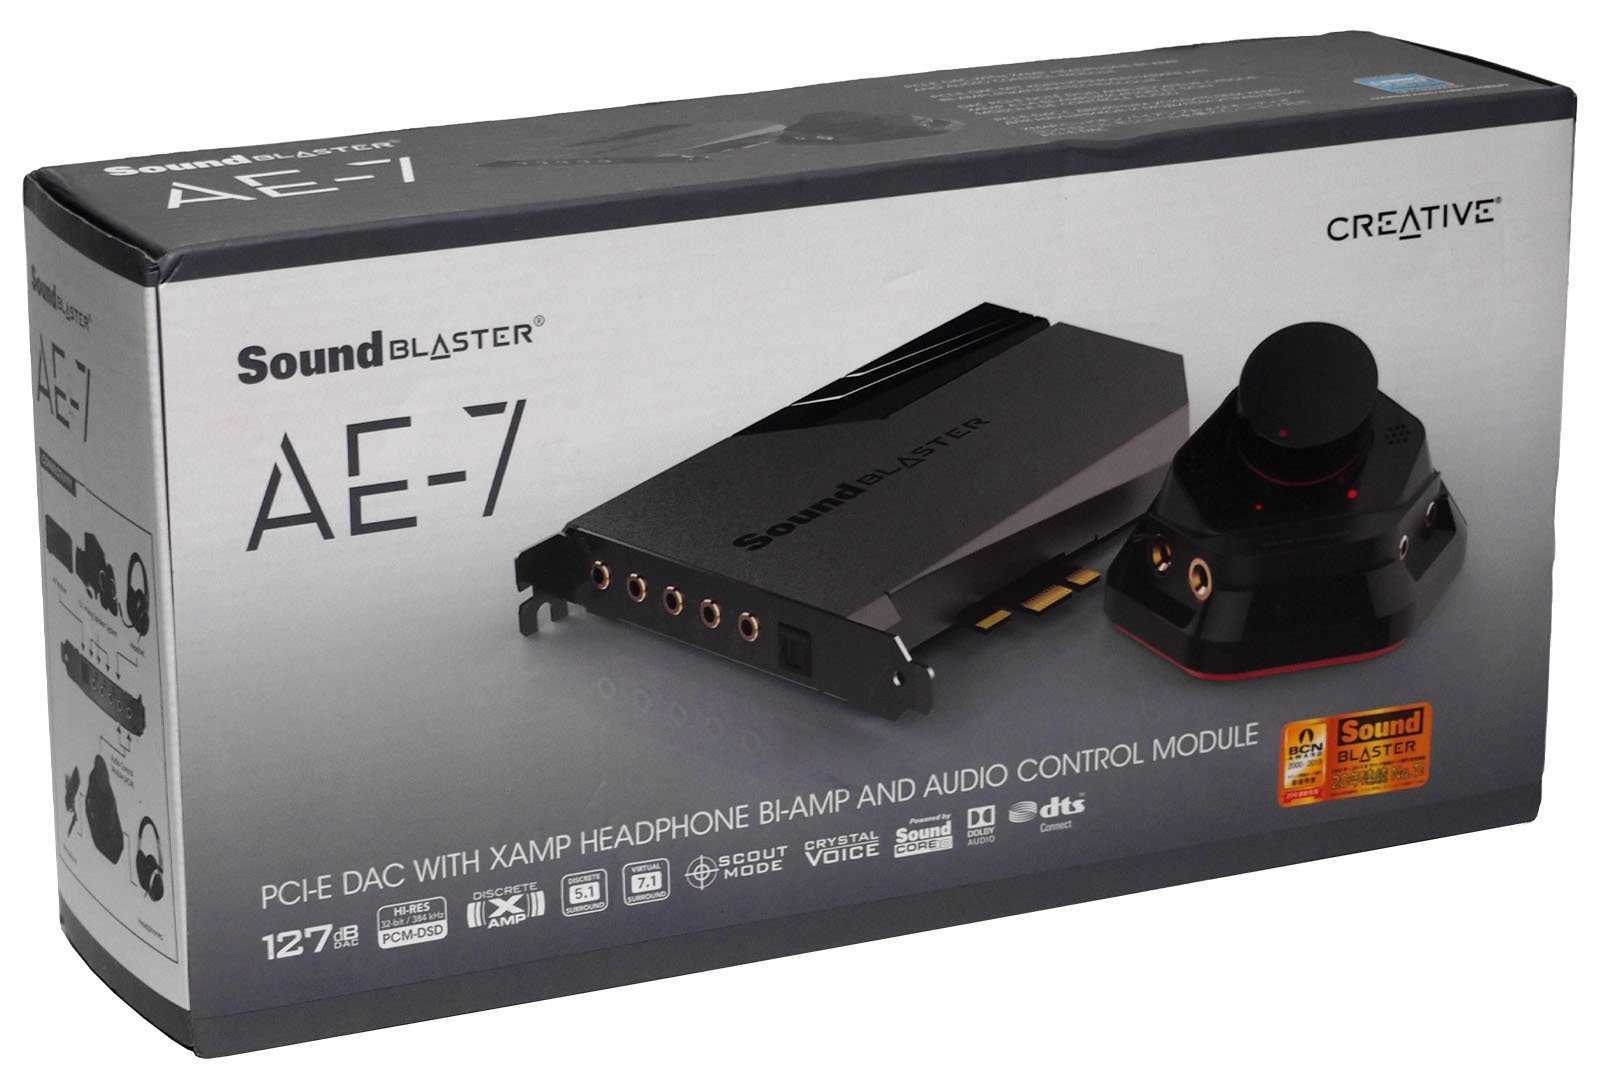 Creative sound blaster e5 review – portable dac with headphone amp